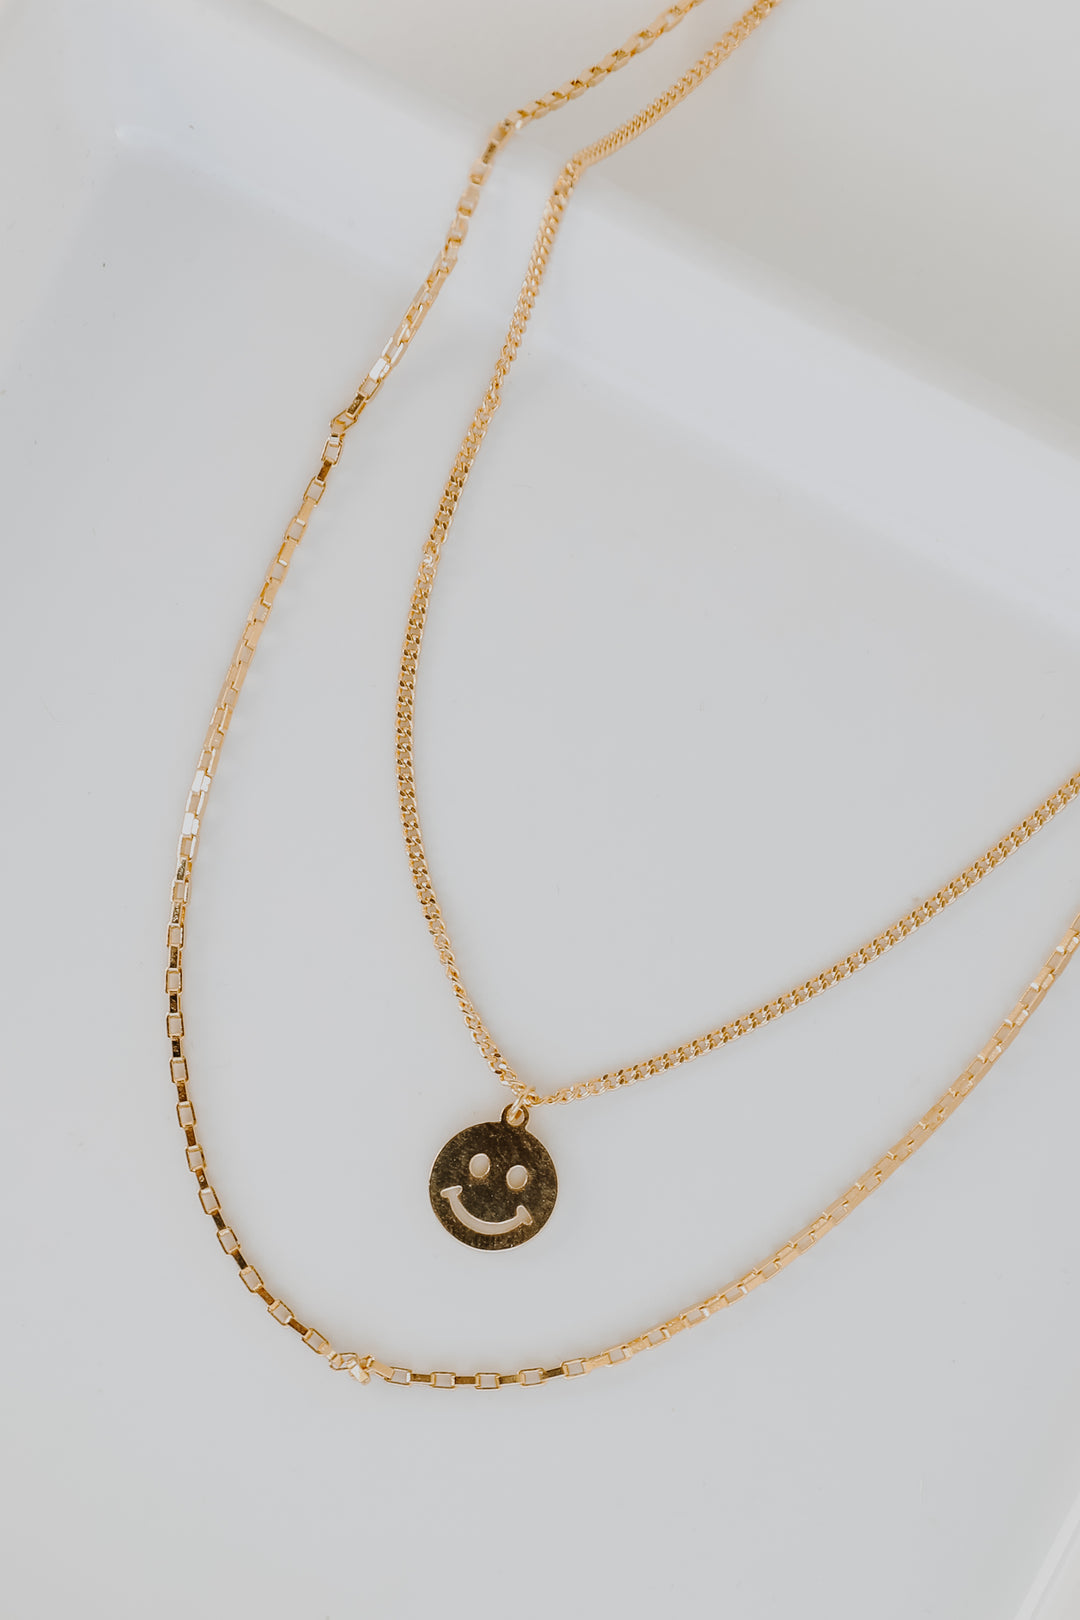 Gold Smiley Face Layered Necklace from dress up